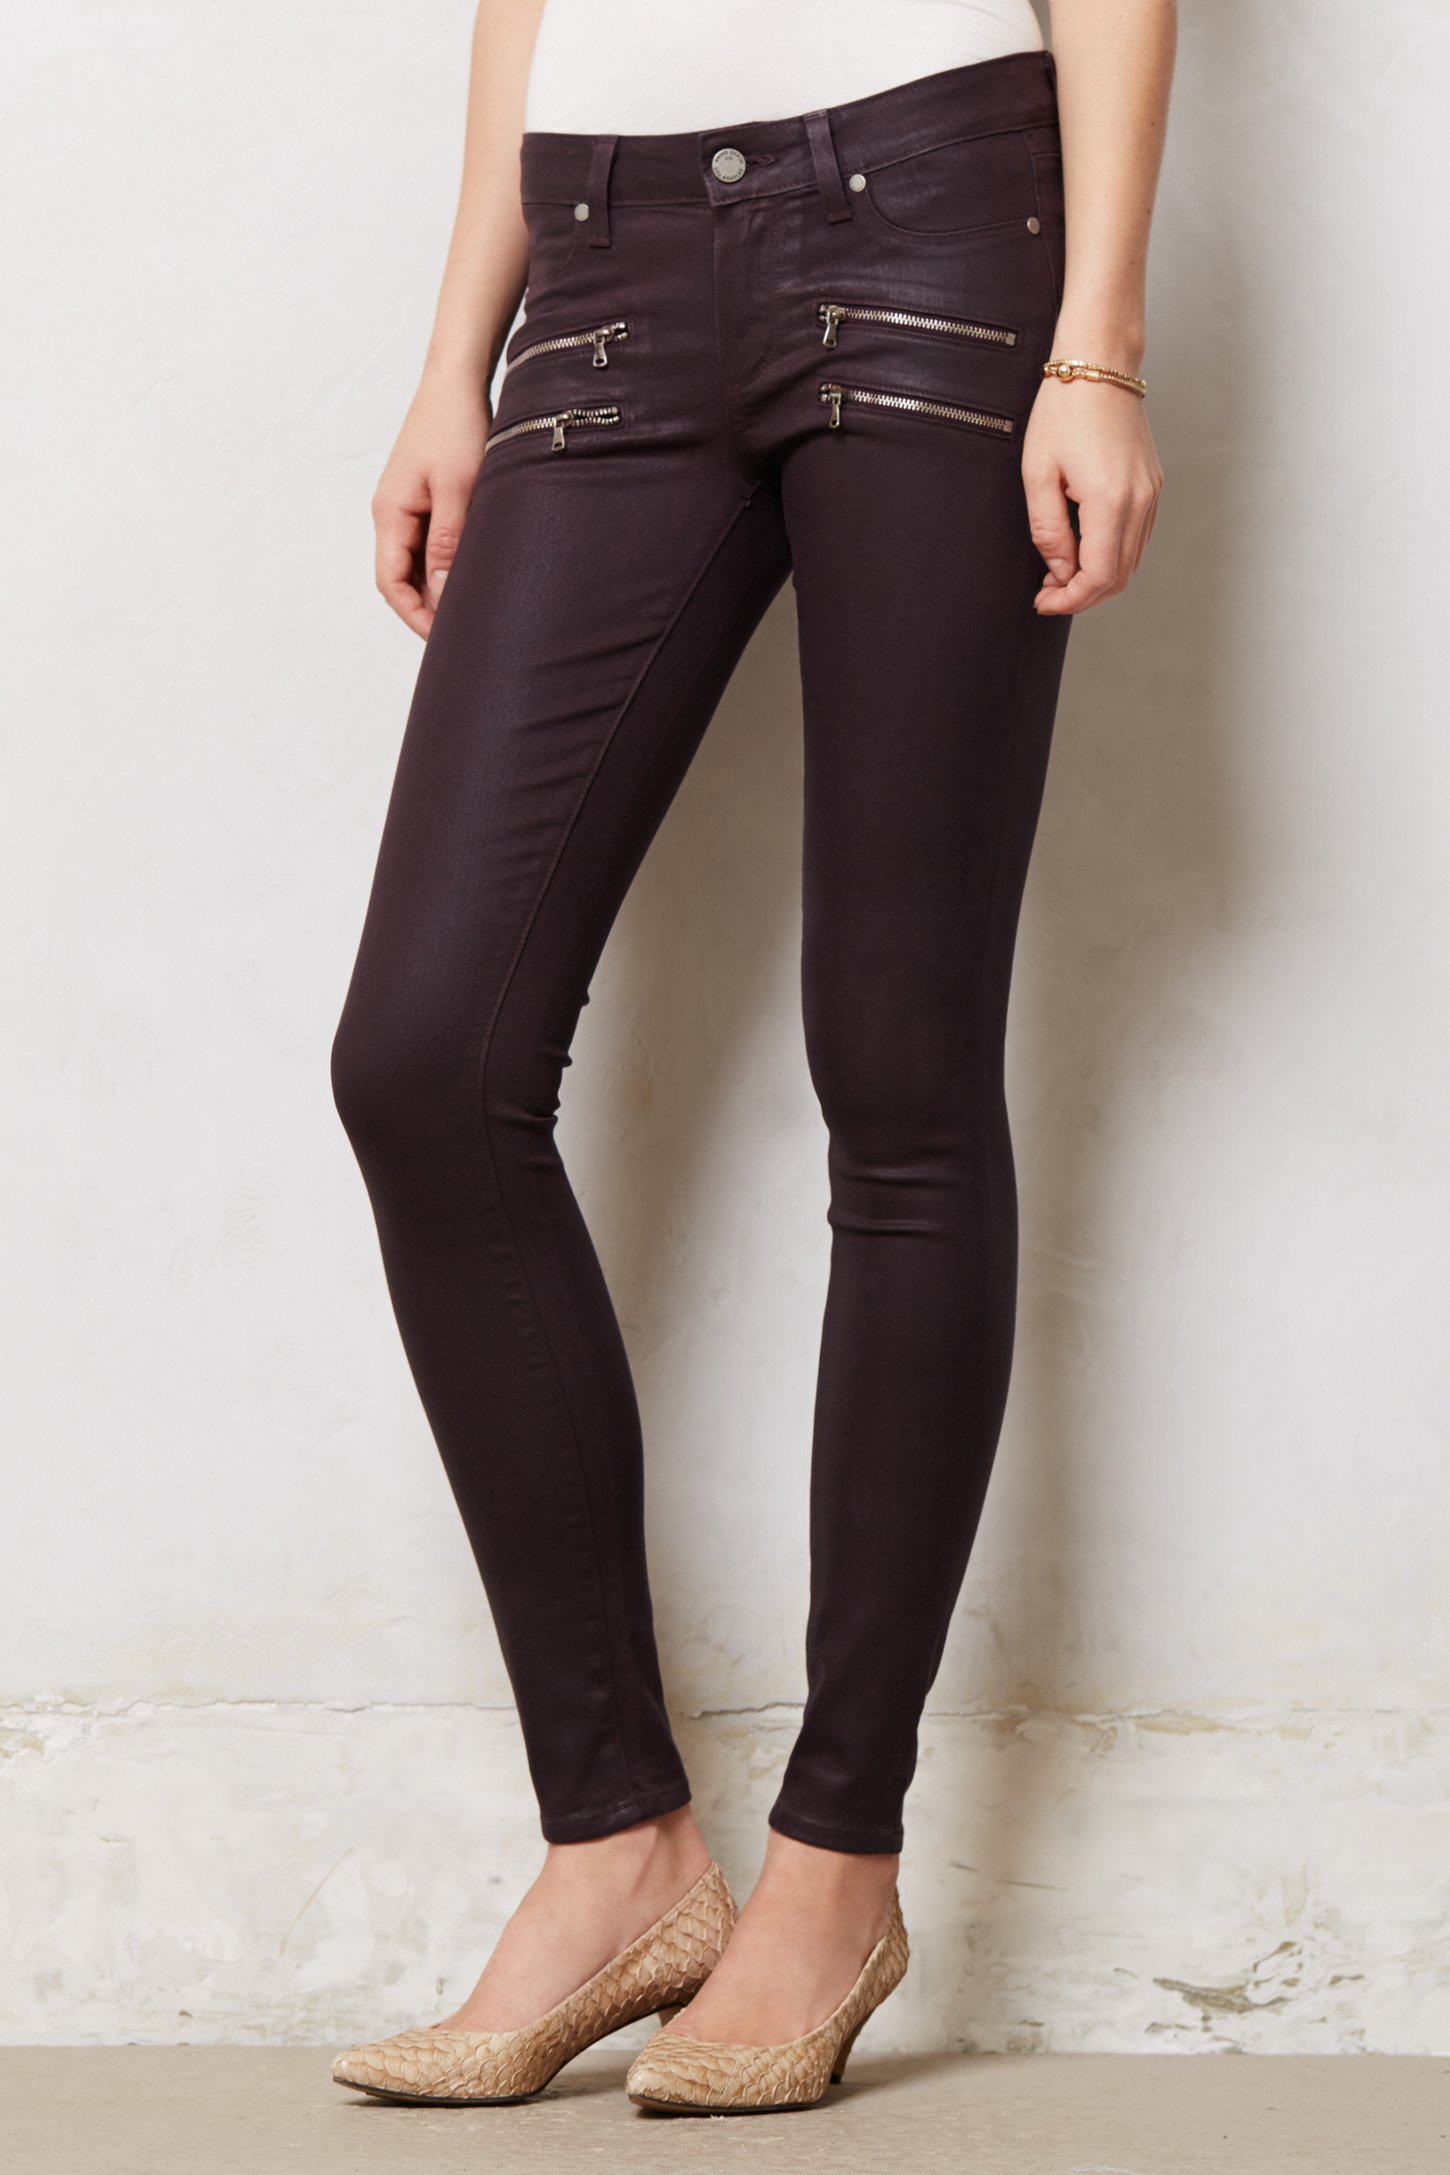 Lyst - Paige Edgemont Ultra Skinny Jeans in Black